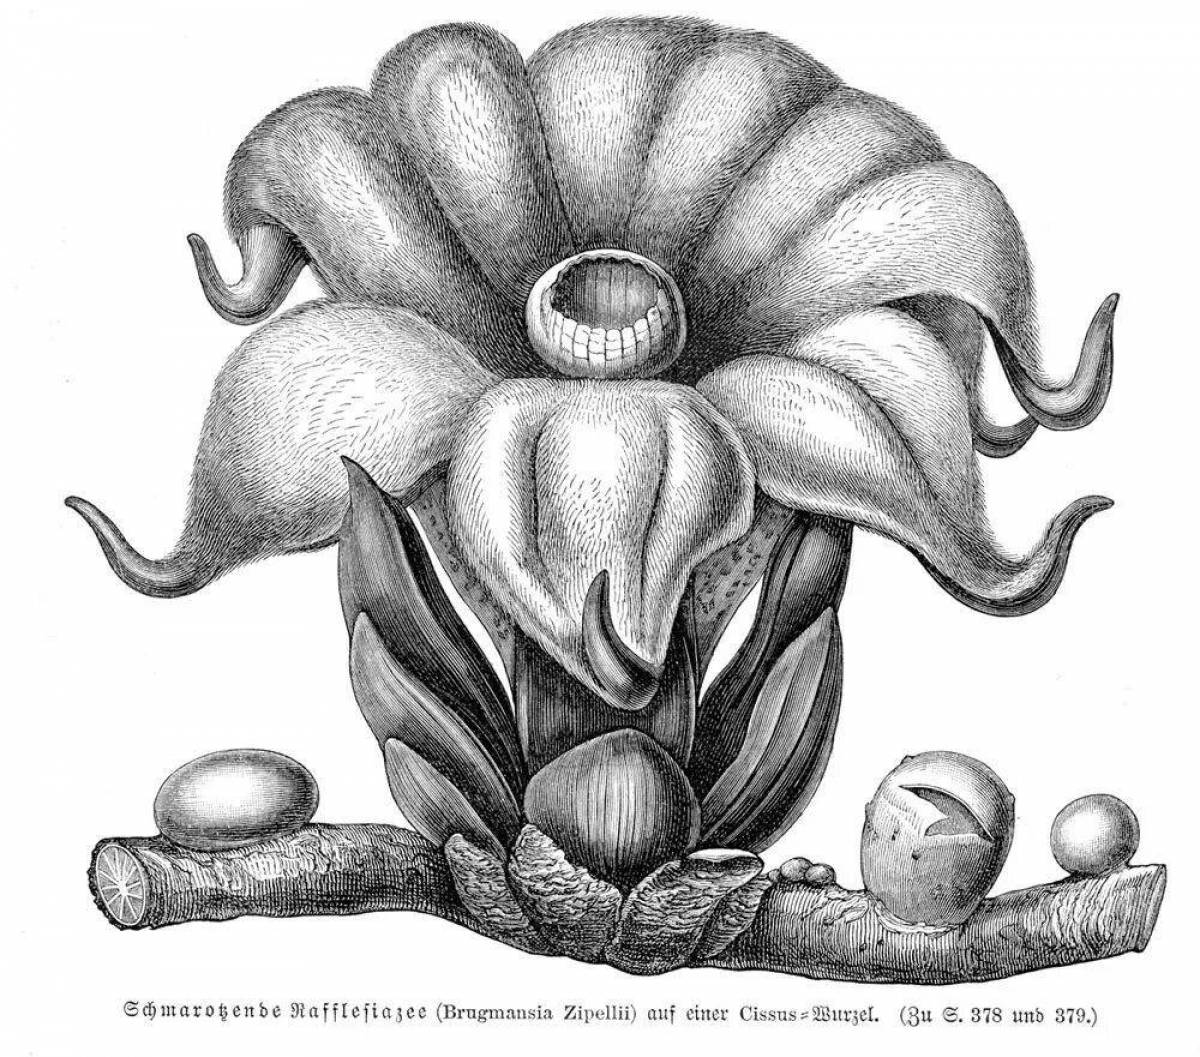 Awesome rafflesia arnold coloring book